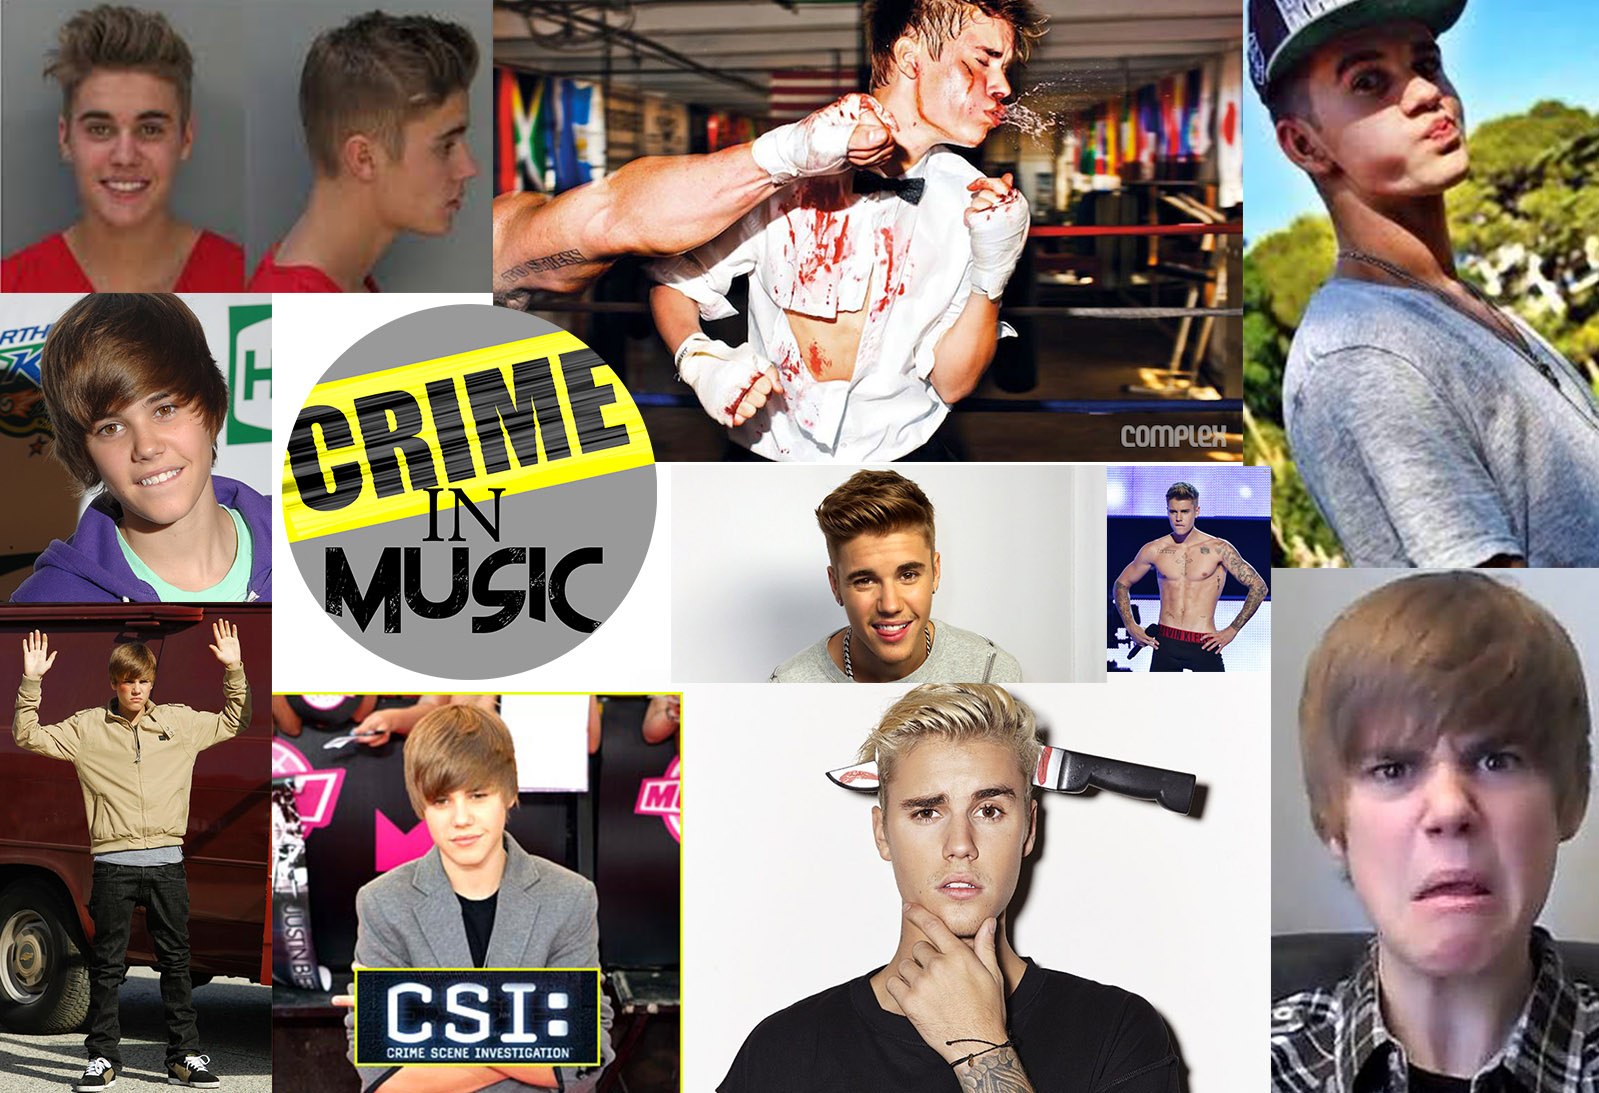 photo collage of Justin Bieber, Actor, Musician, pop music